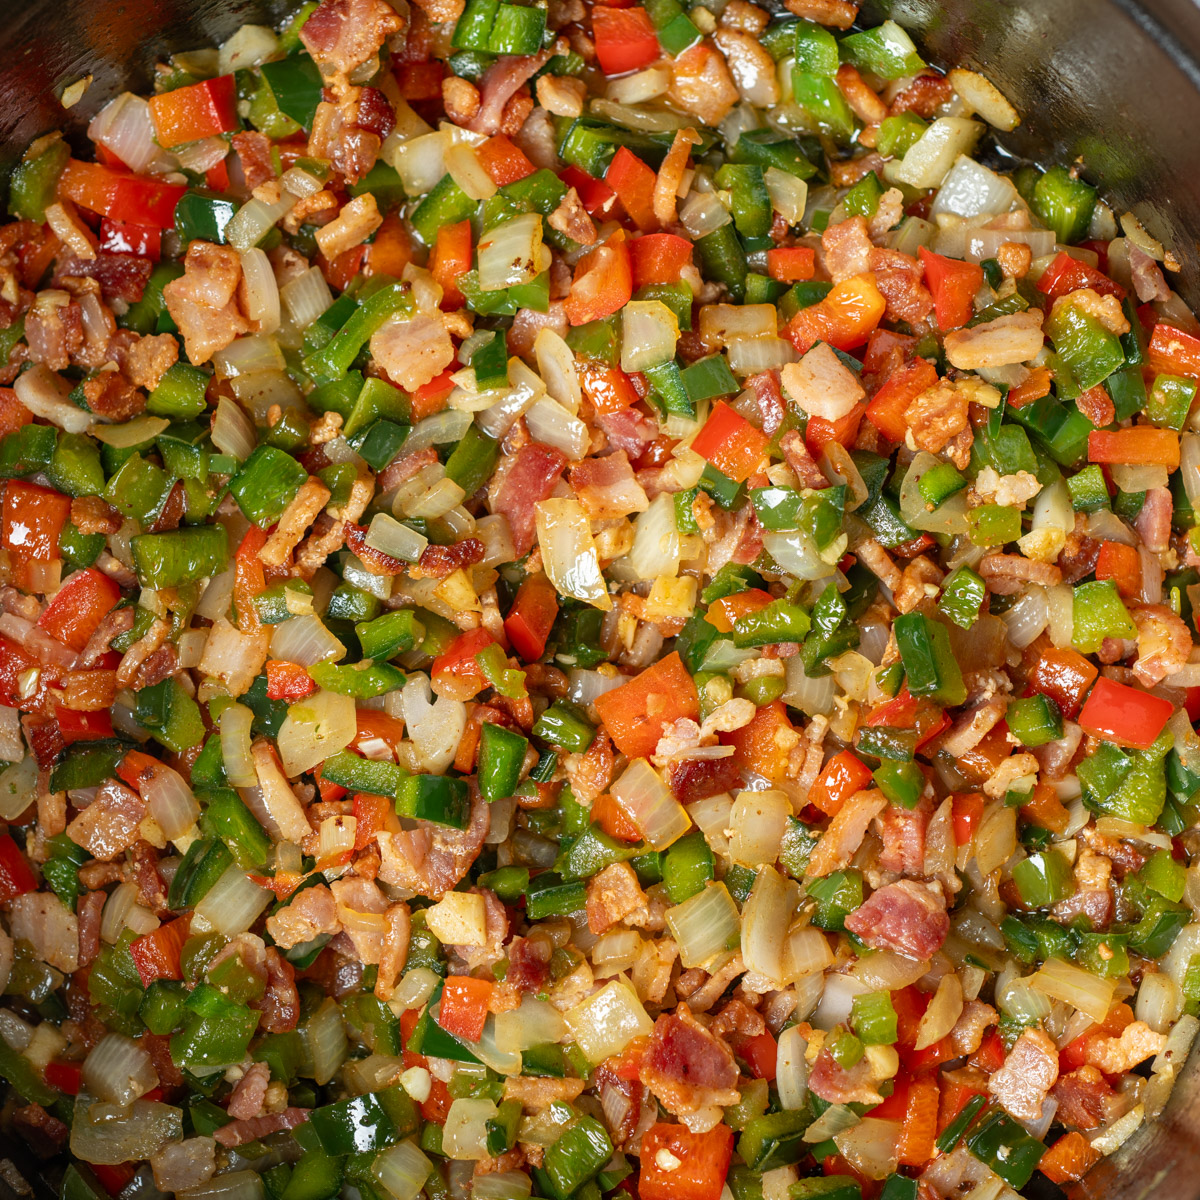 Cooked bacon and vegetables.